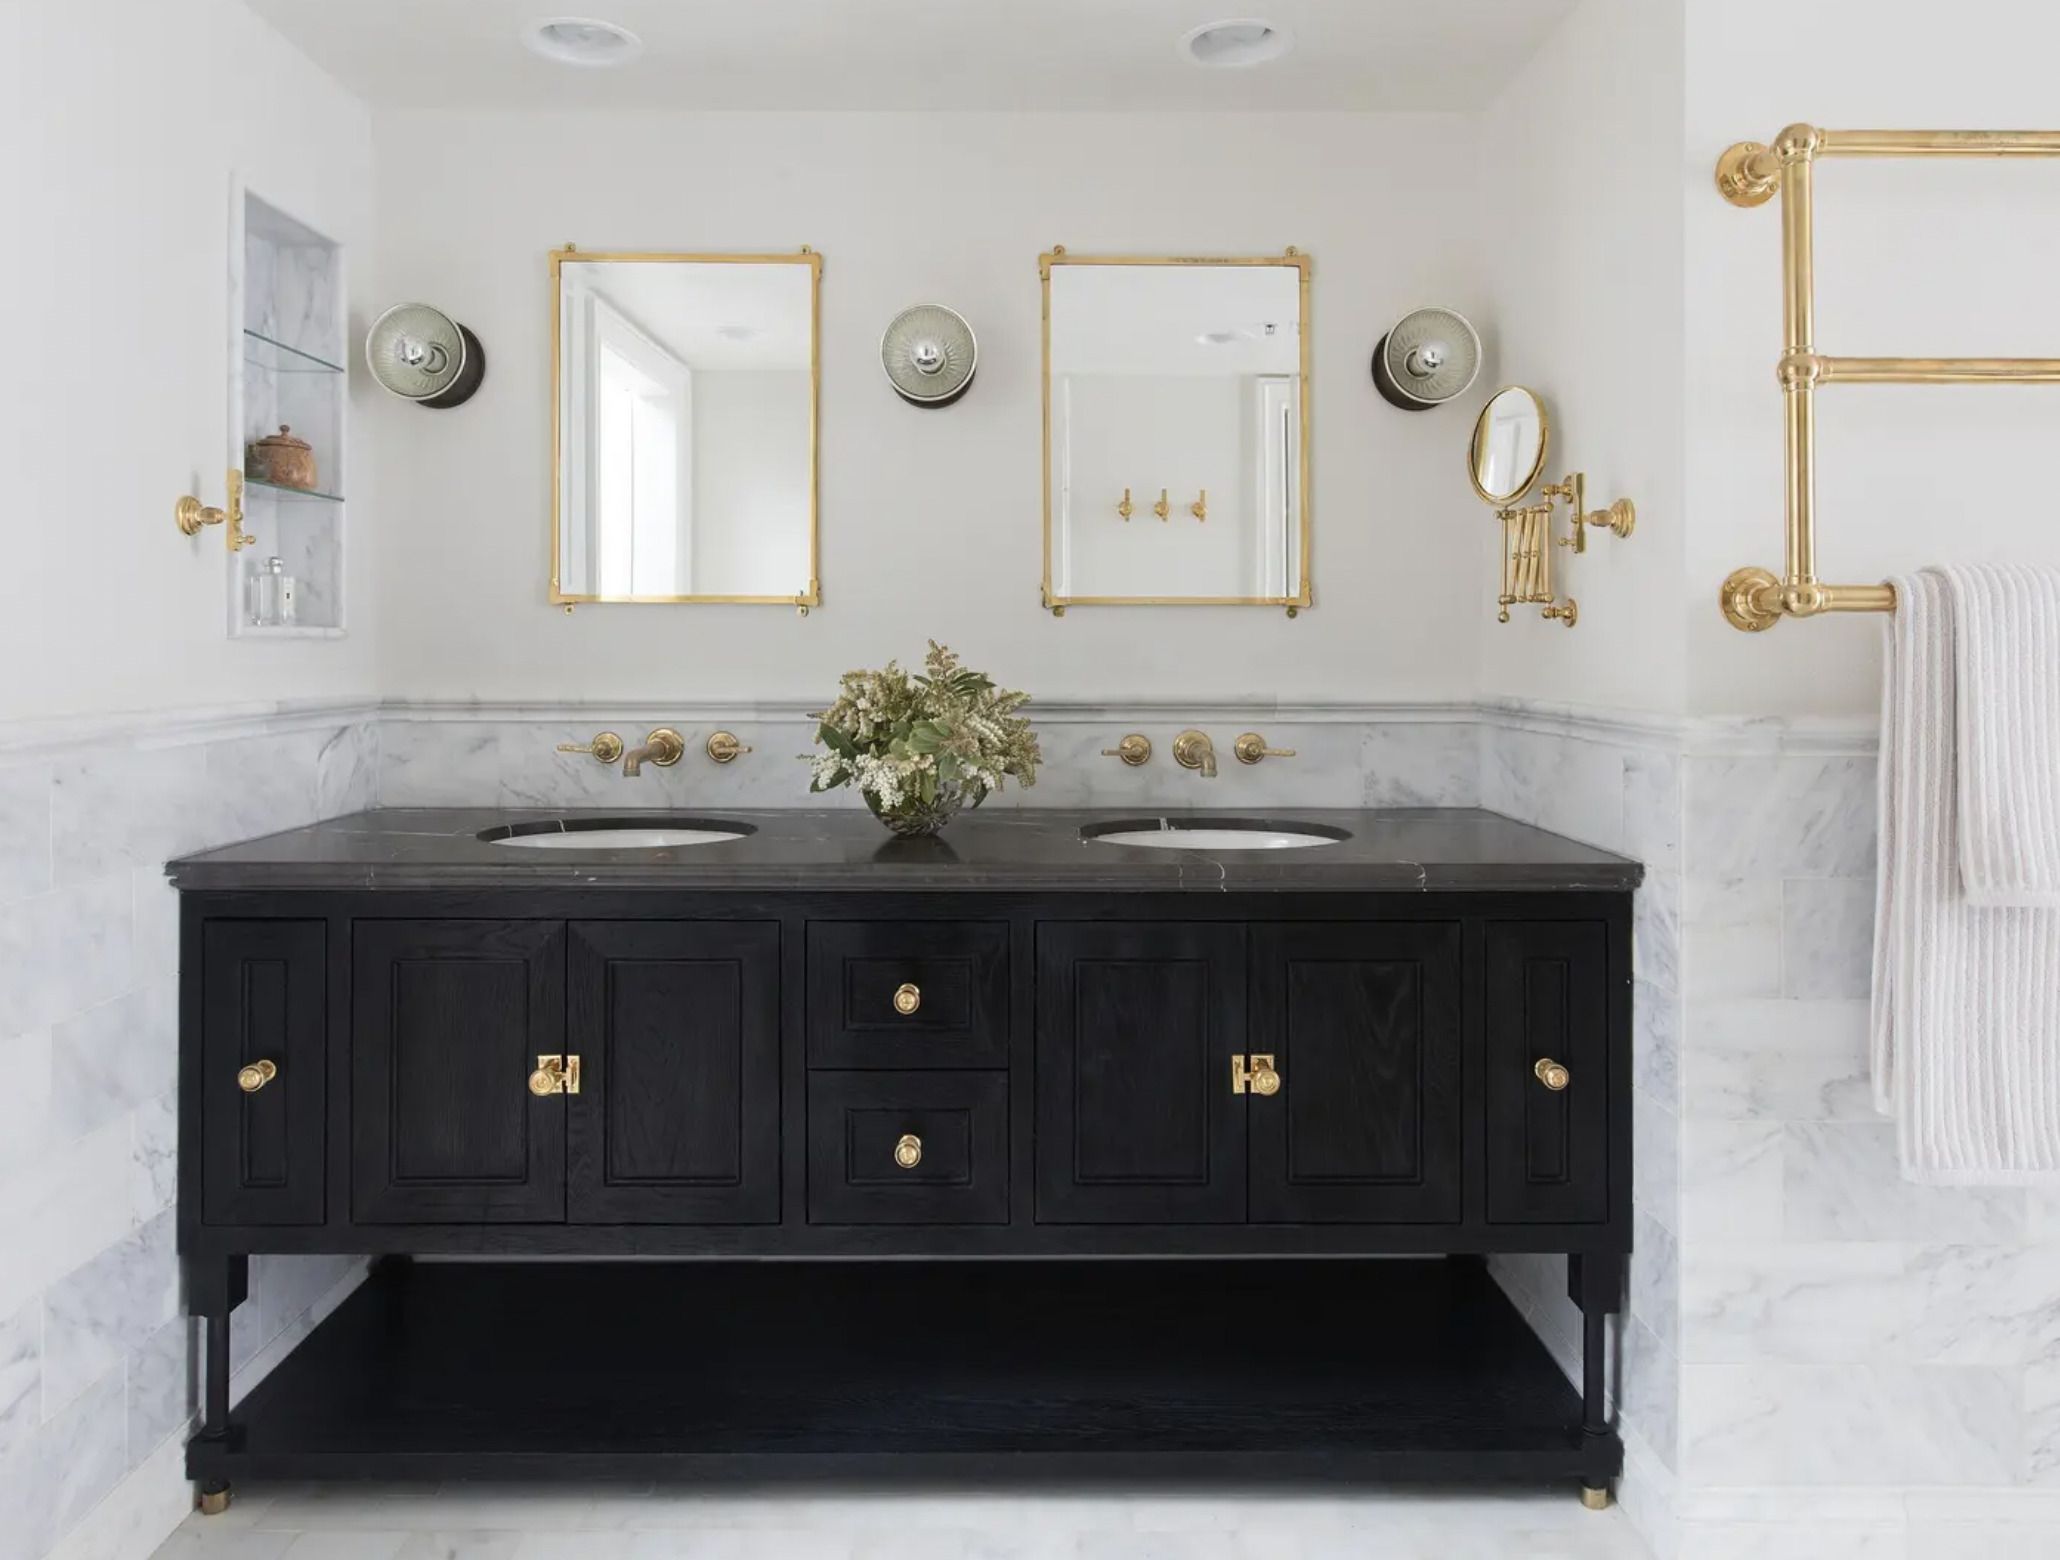 Stunning contemporary black, white and gold bathroom boasts white